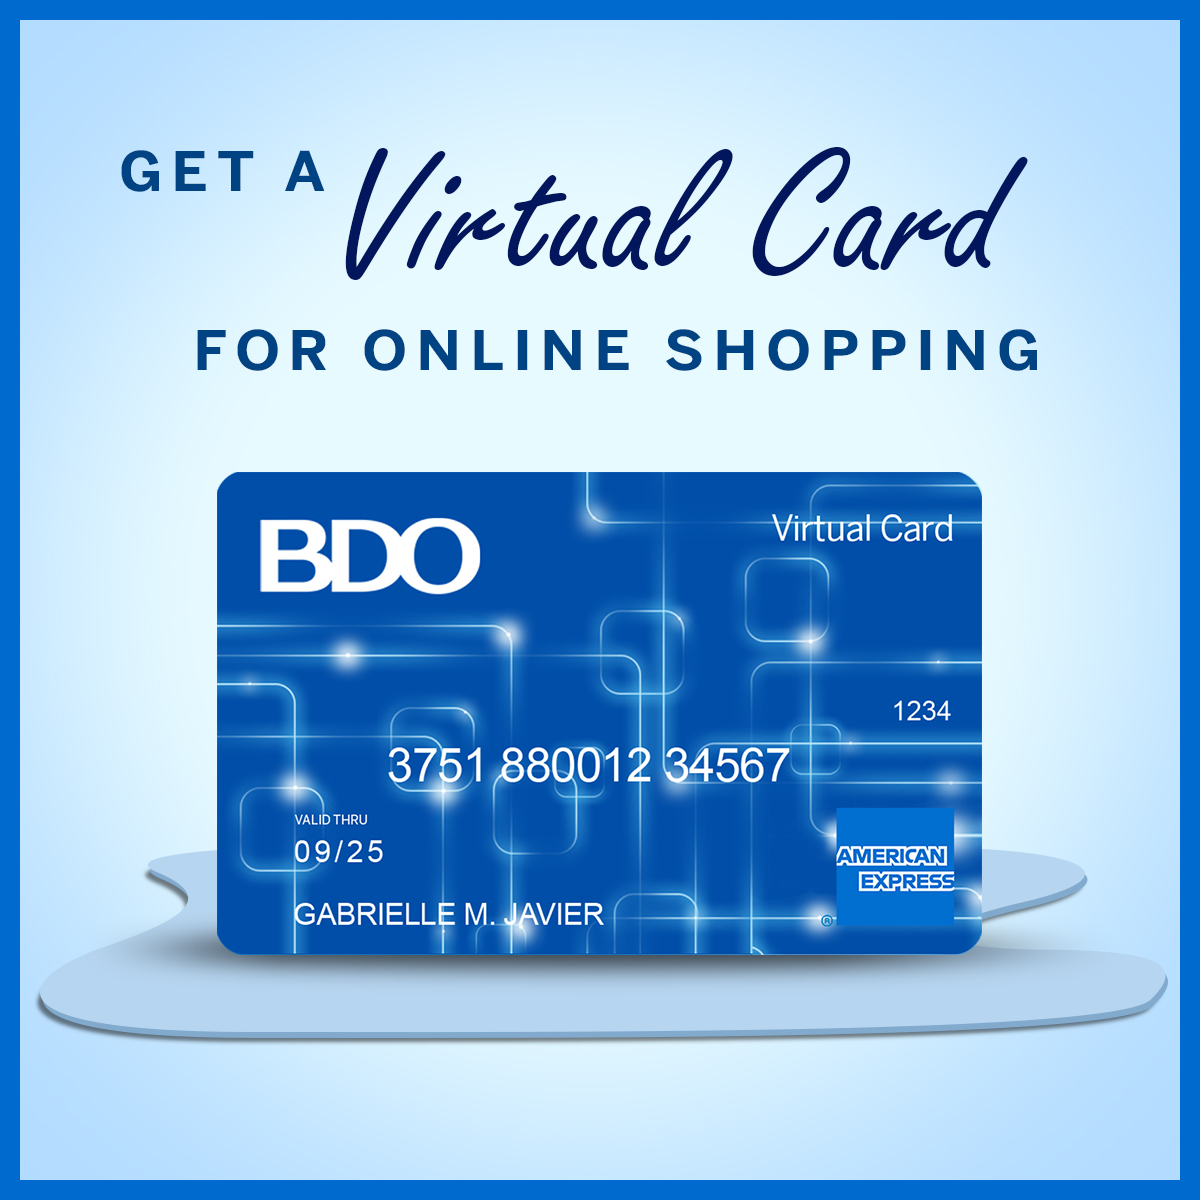 bdo-and-american-express-introduce-virtual-card-for-online-shopping